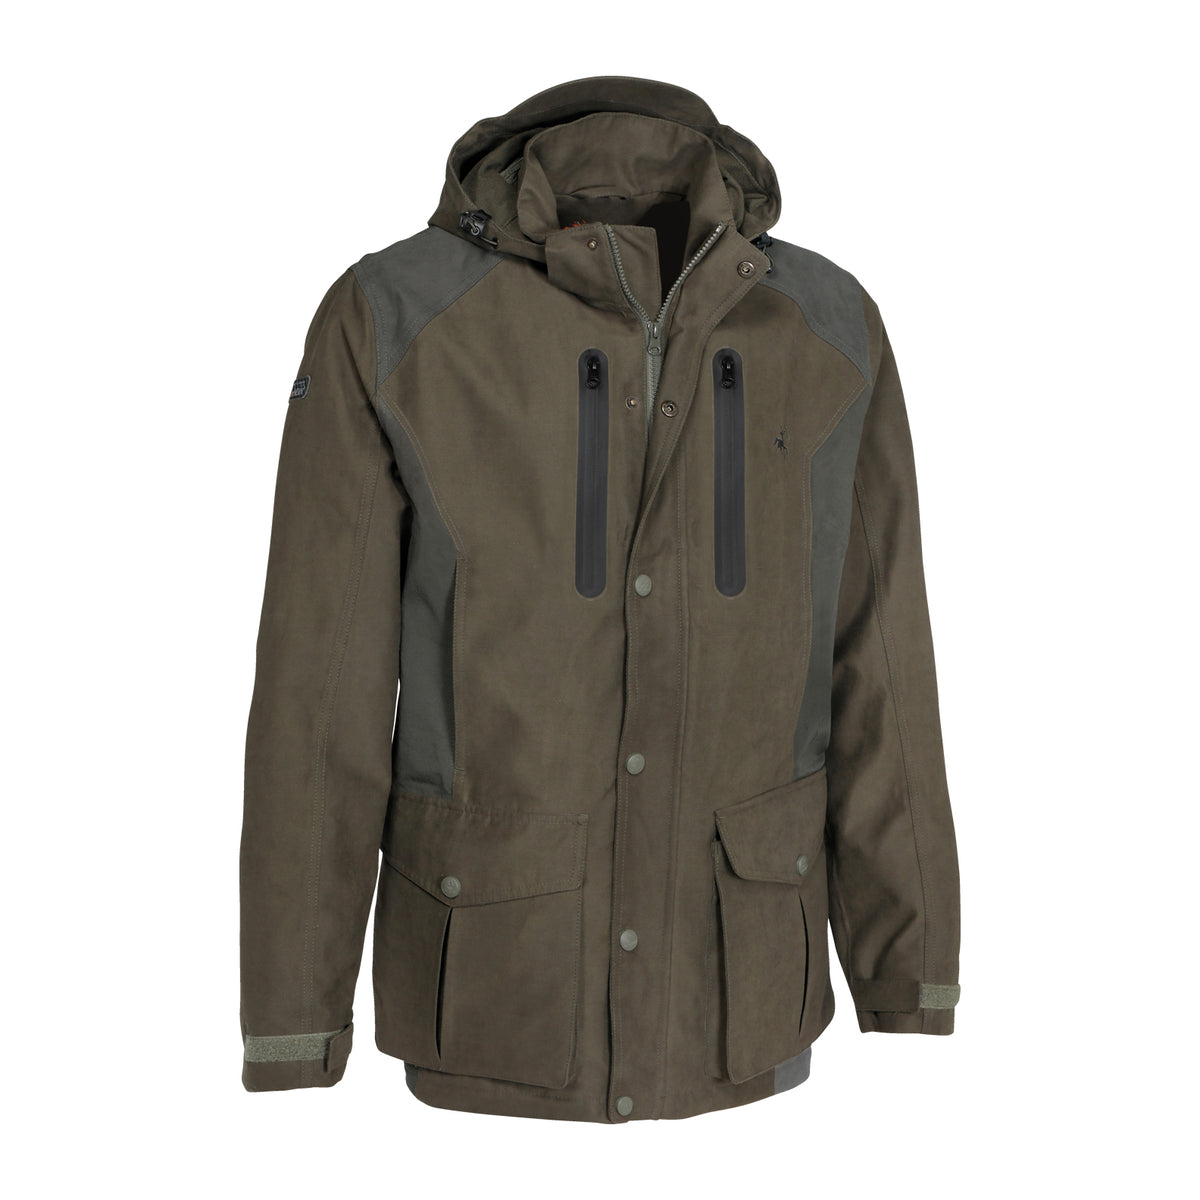 Verney Carron Falcon Jacket | New Forest Clothing